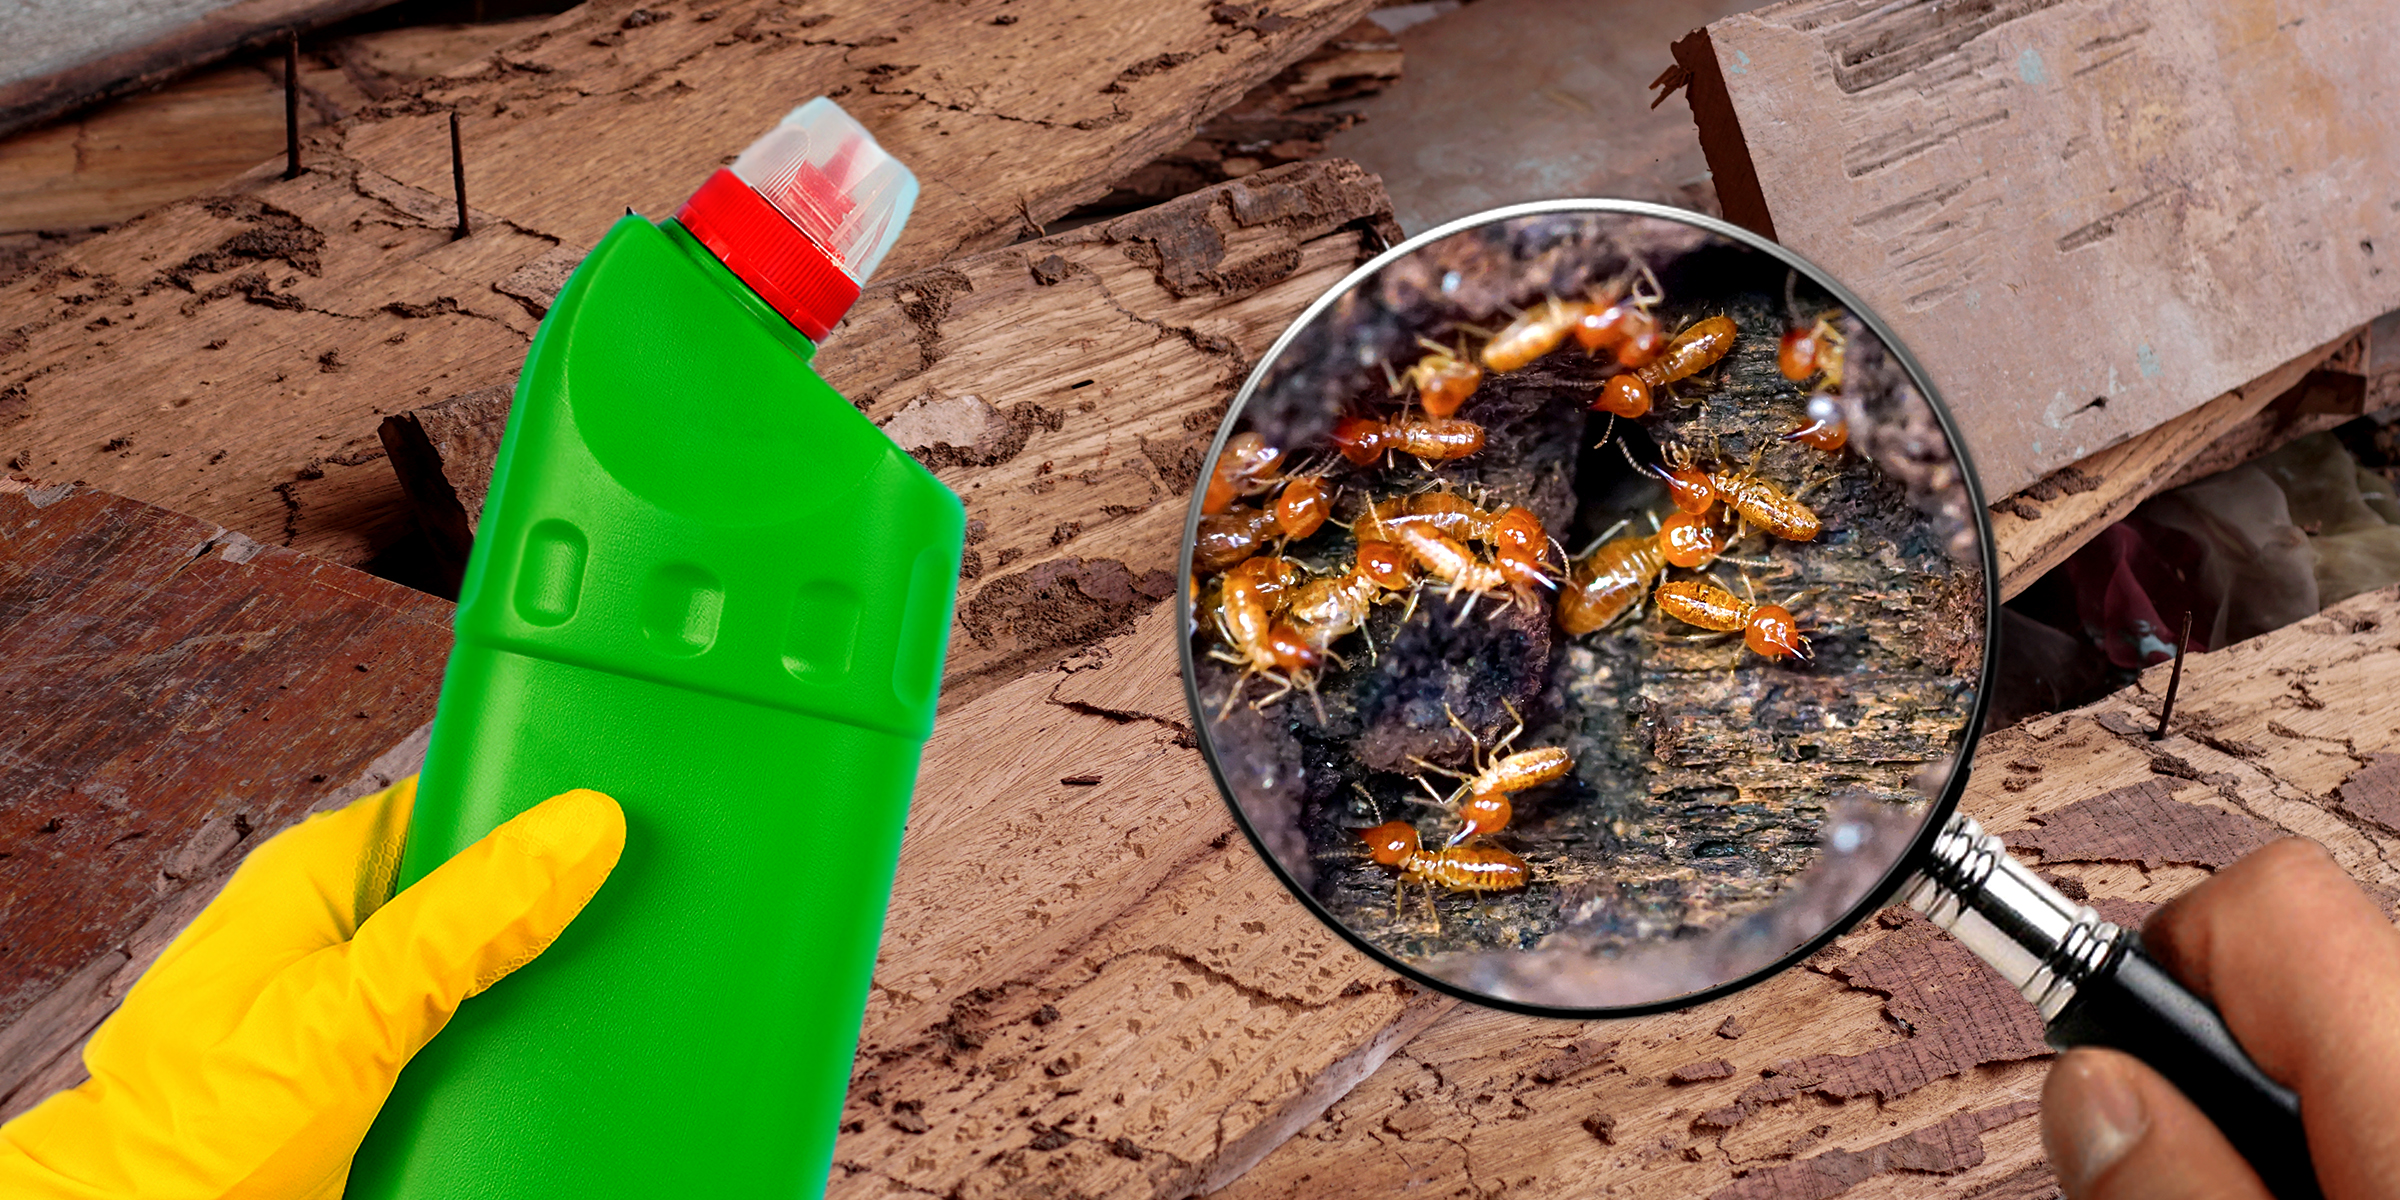 A bottle of bleach and termites under a magnifying glass | Source: Shutterstock